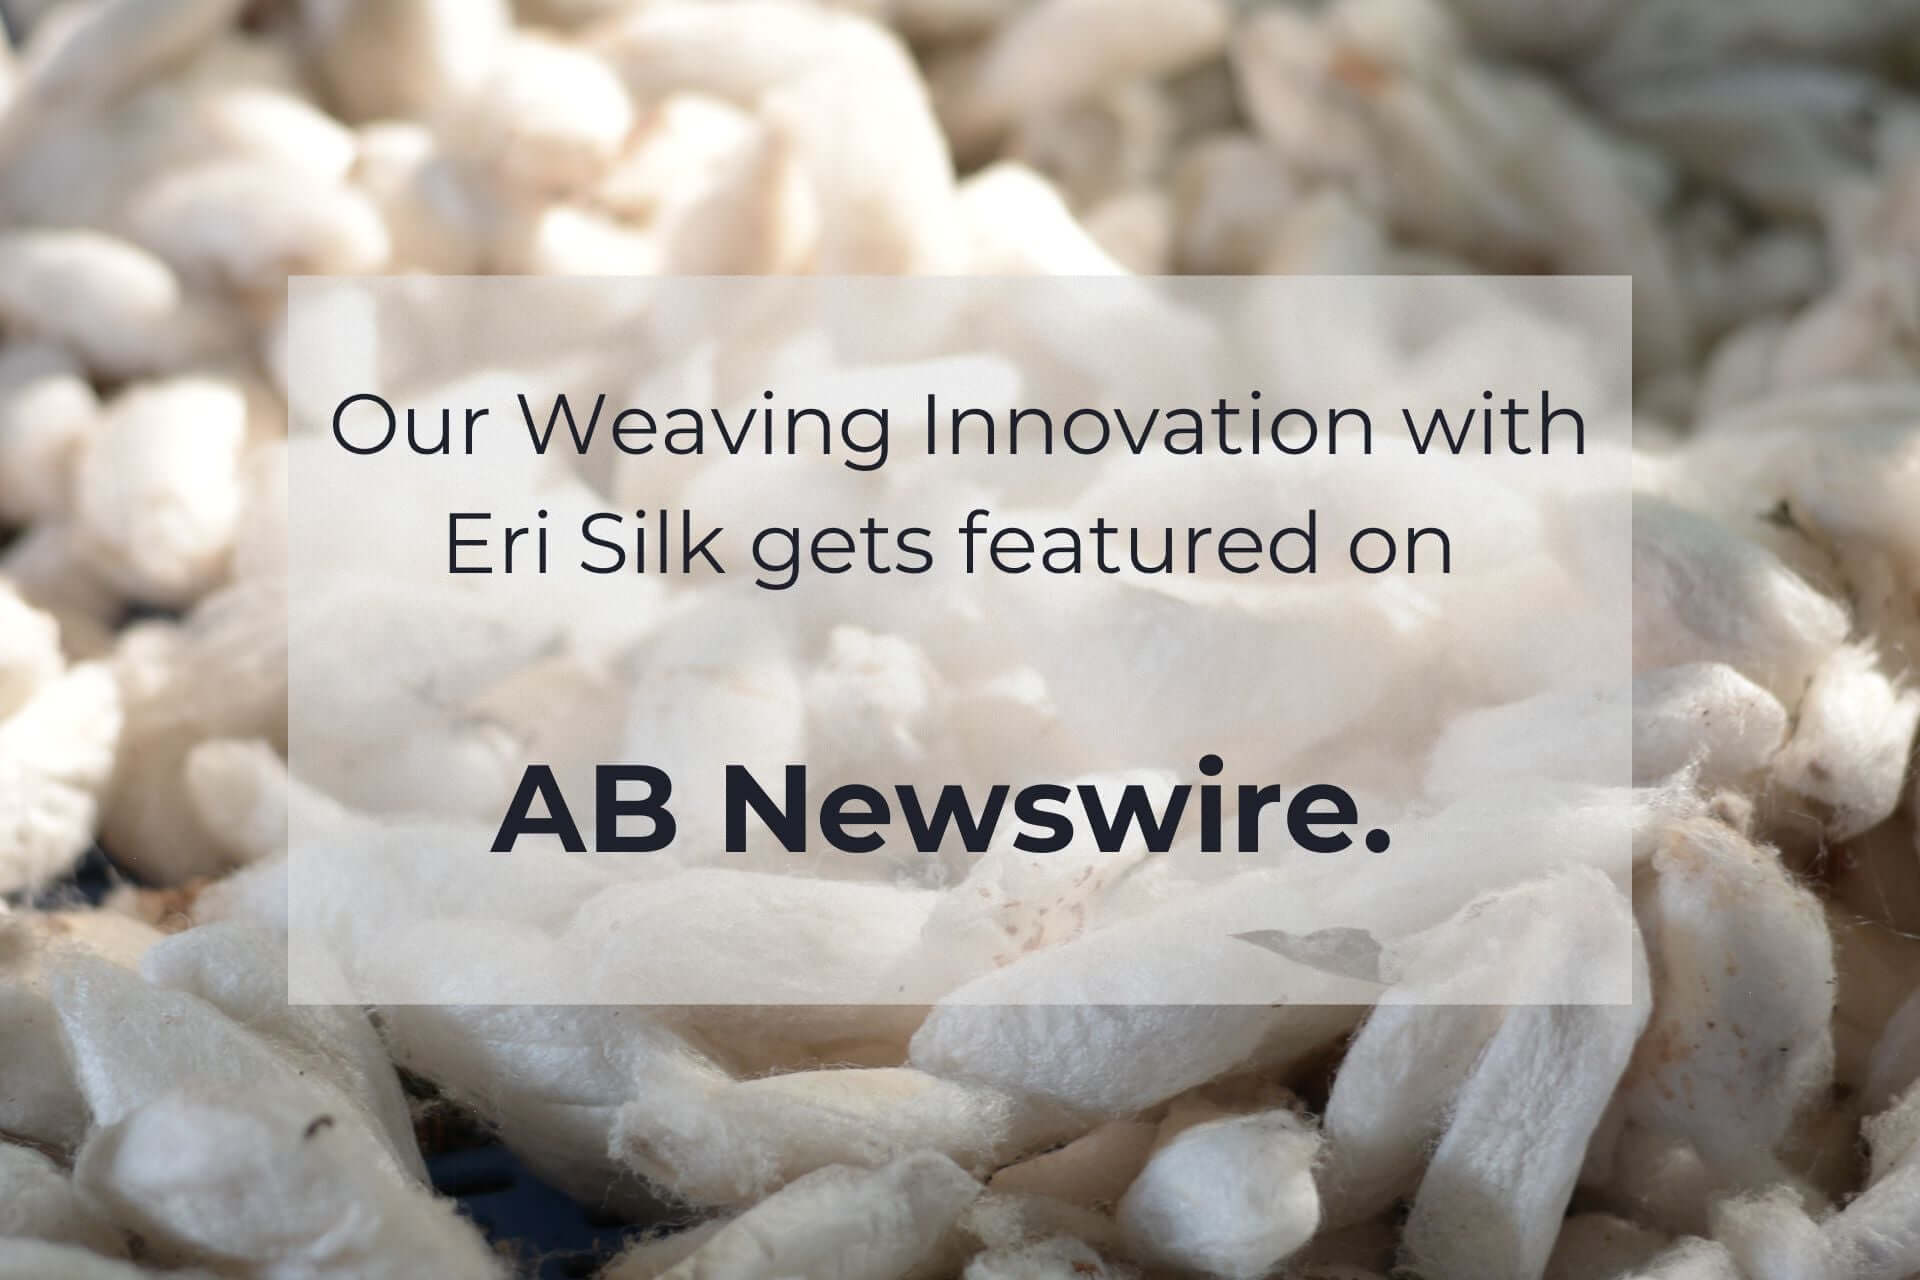 Dzukou's Sustainable Silk Revolution Garners Global Attention: Featured in AB Newswire as a Beacon of Social Innovation